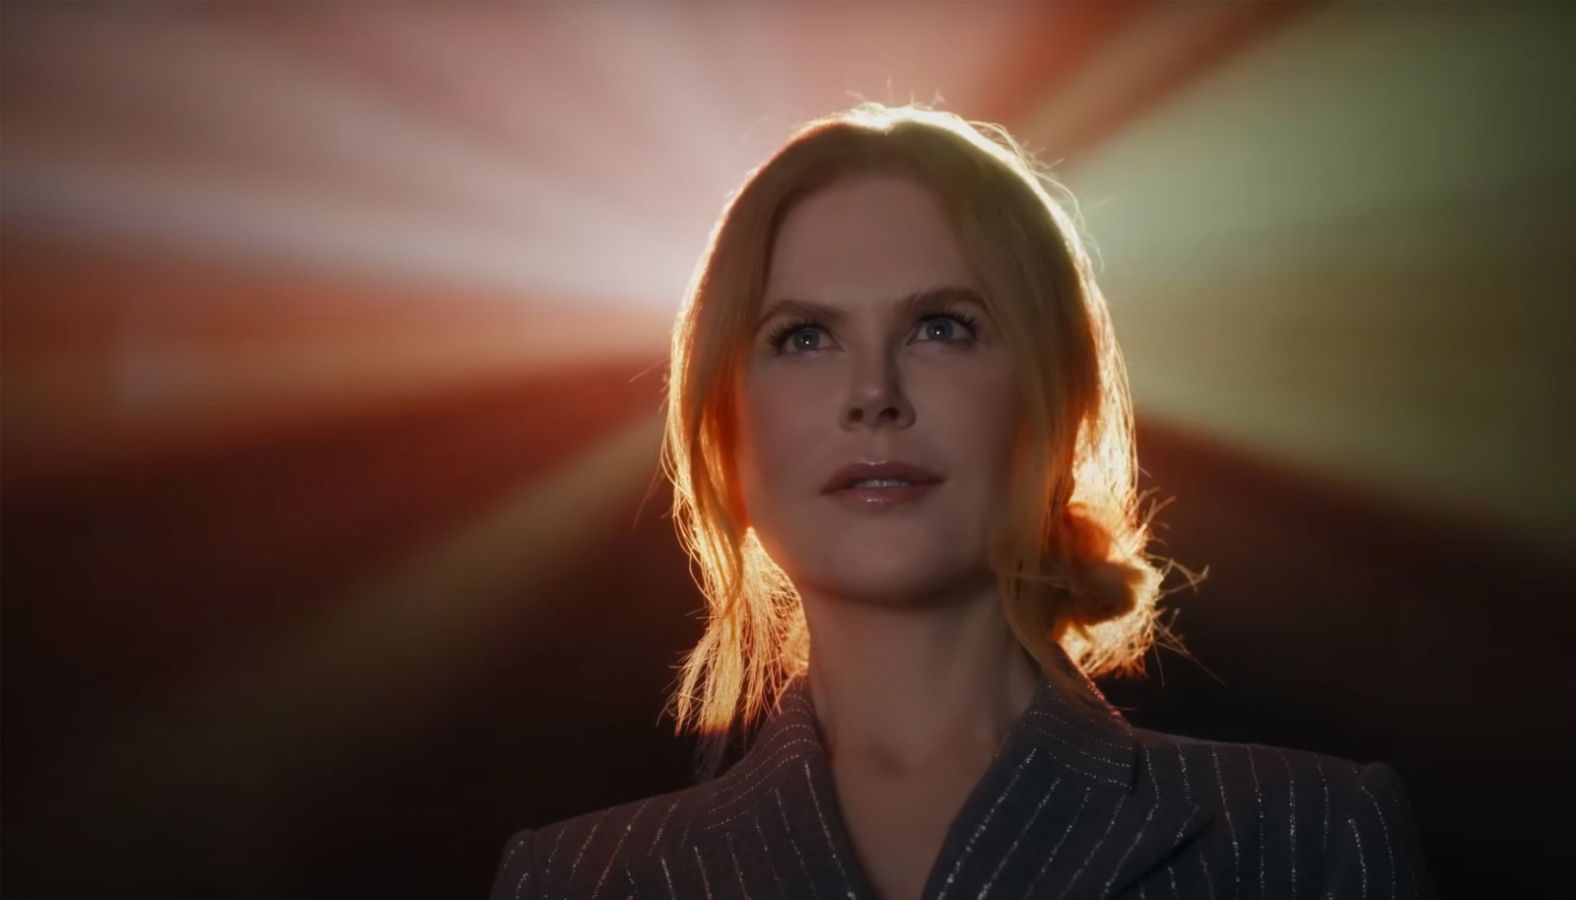 Kidman's AMC Theaters ad campaign, which debuted in 2021 and appears before the start of movies at the cinema chain, <a href="index.php?page=&url=https%3A%2F%2Fwww.cnn.com%2F2024%2F03%2F19%2Fentertainment%2Fnicole-kidman-say-she-hopes-amc-ad-will-help-keep-the-magic-of-movies-alive%2Findex.html" target="_blank">have become a meme</a> that Kidman has embraced. She told Elle magazine this year that she took on the project out of her "desire to keep cinemas alive."